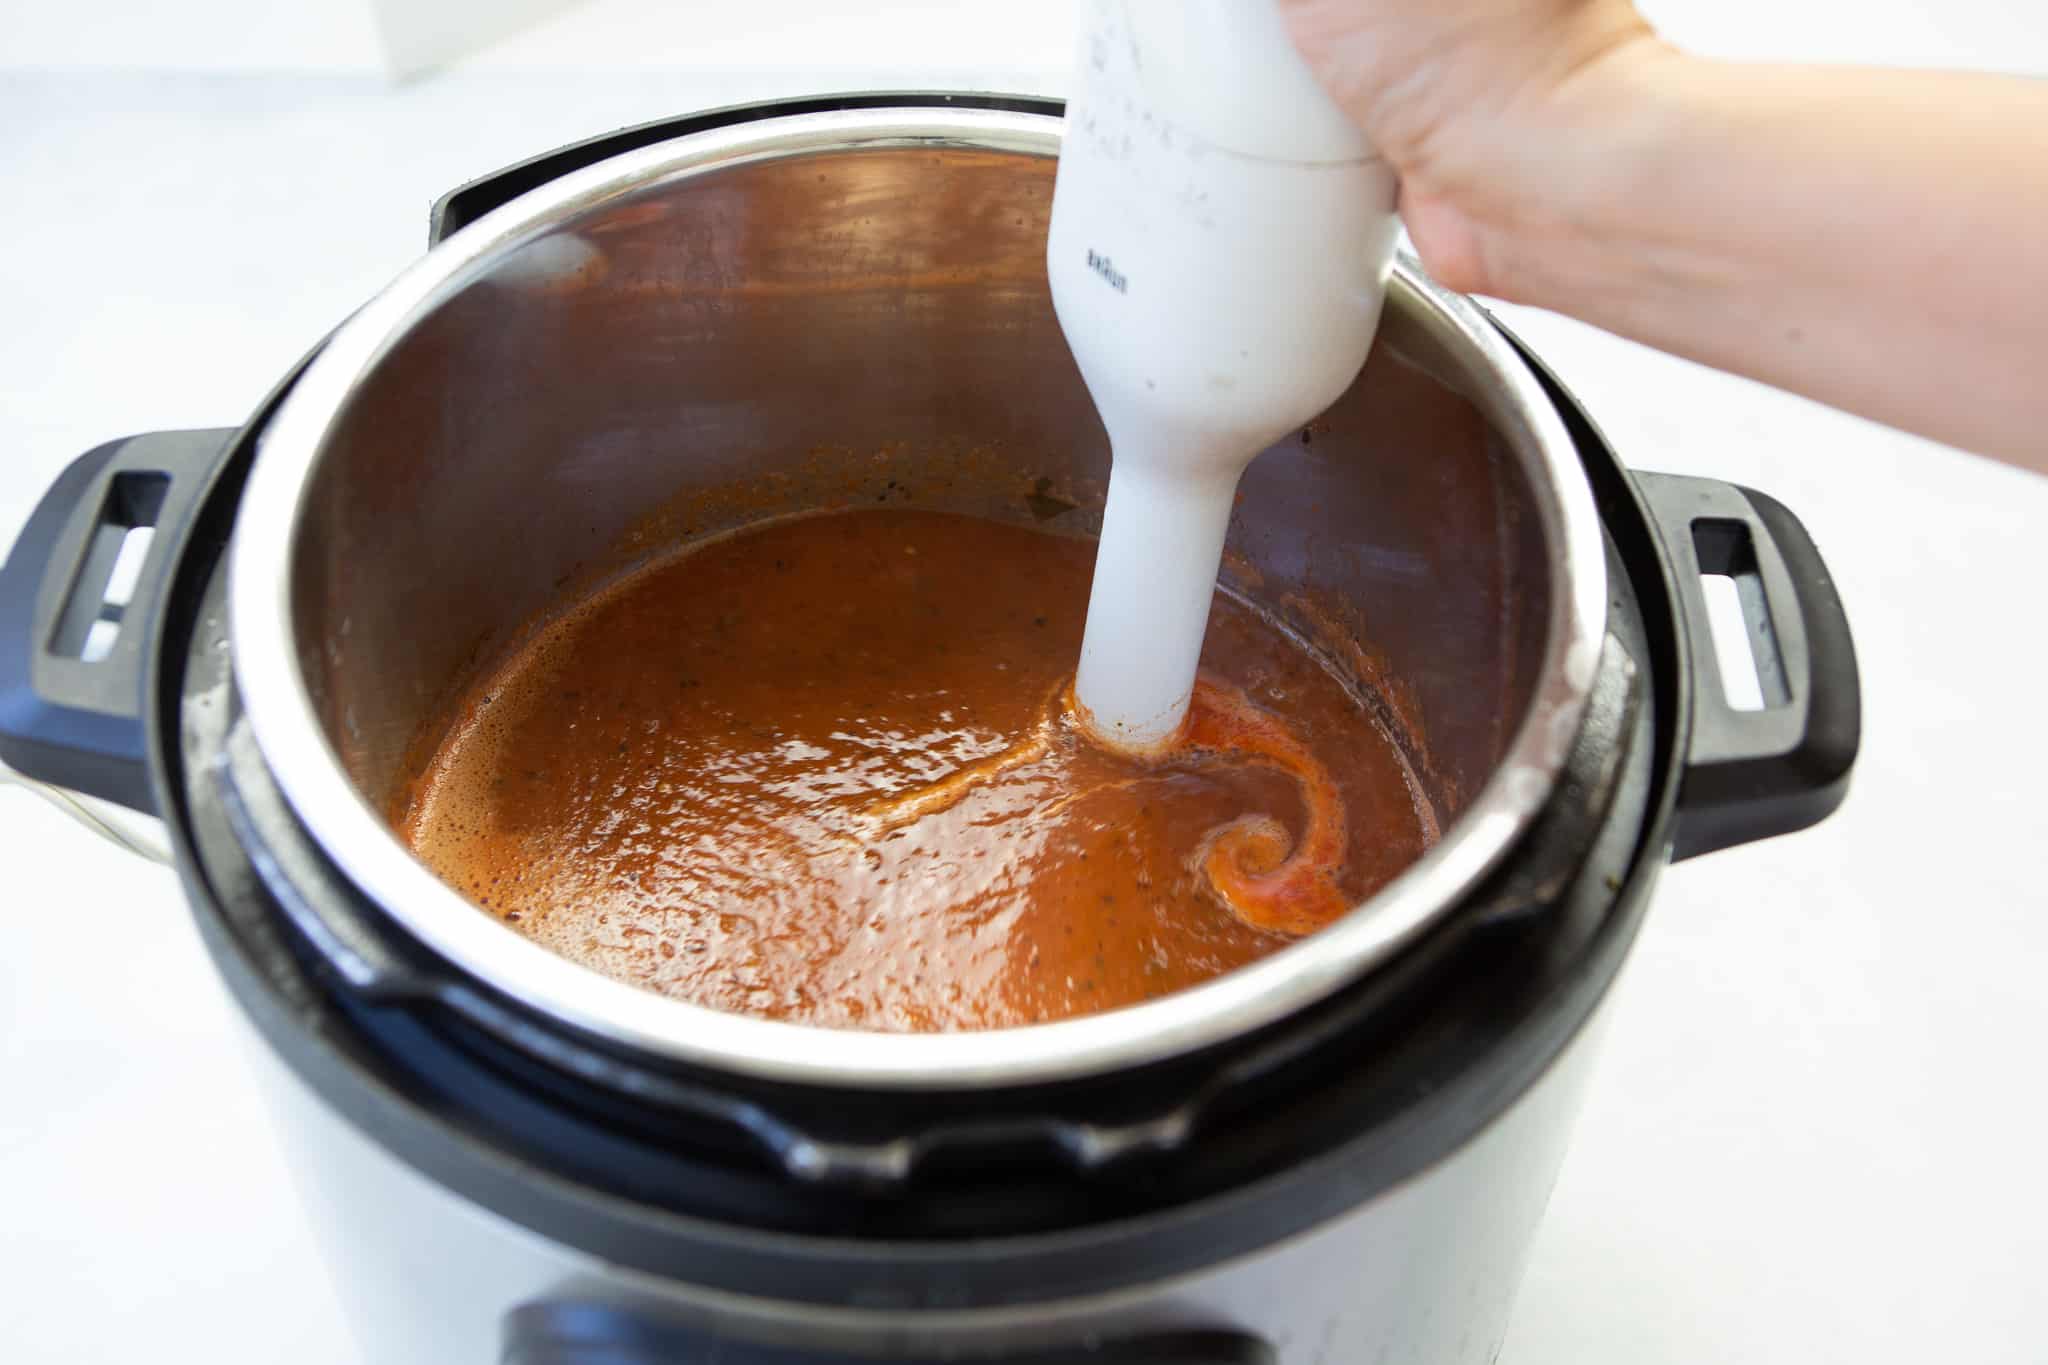 Immersion blender in the tomato soup